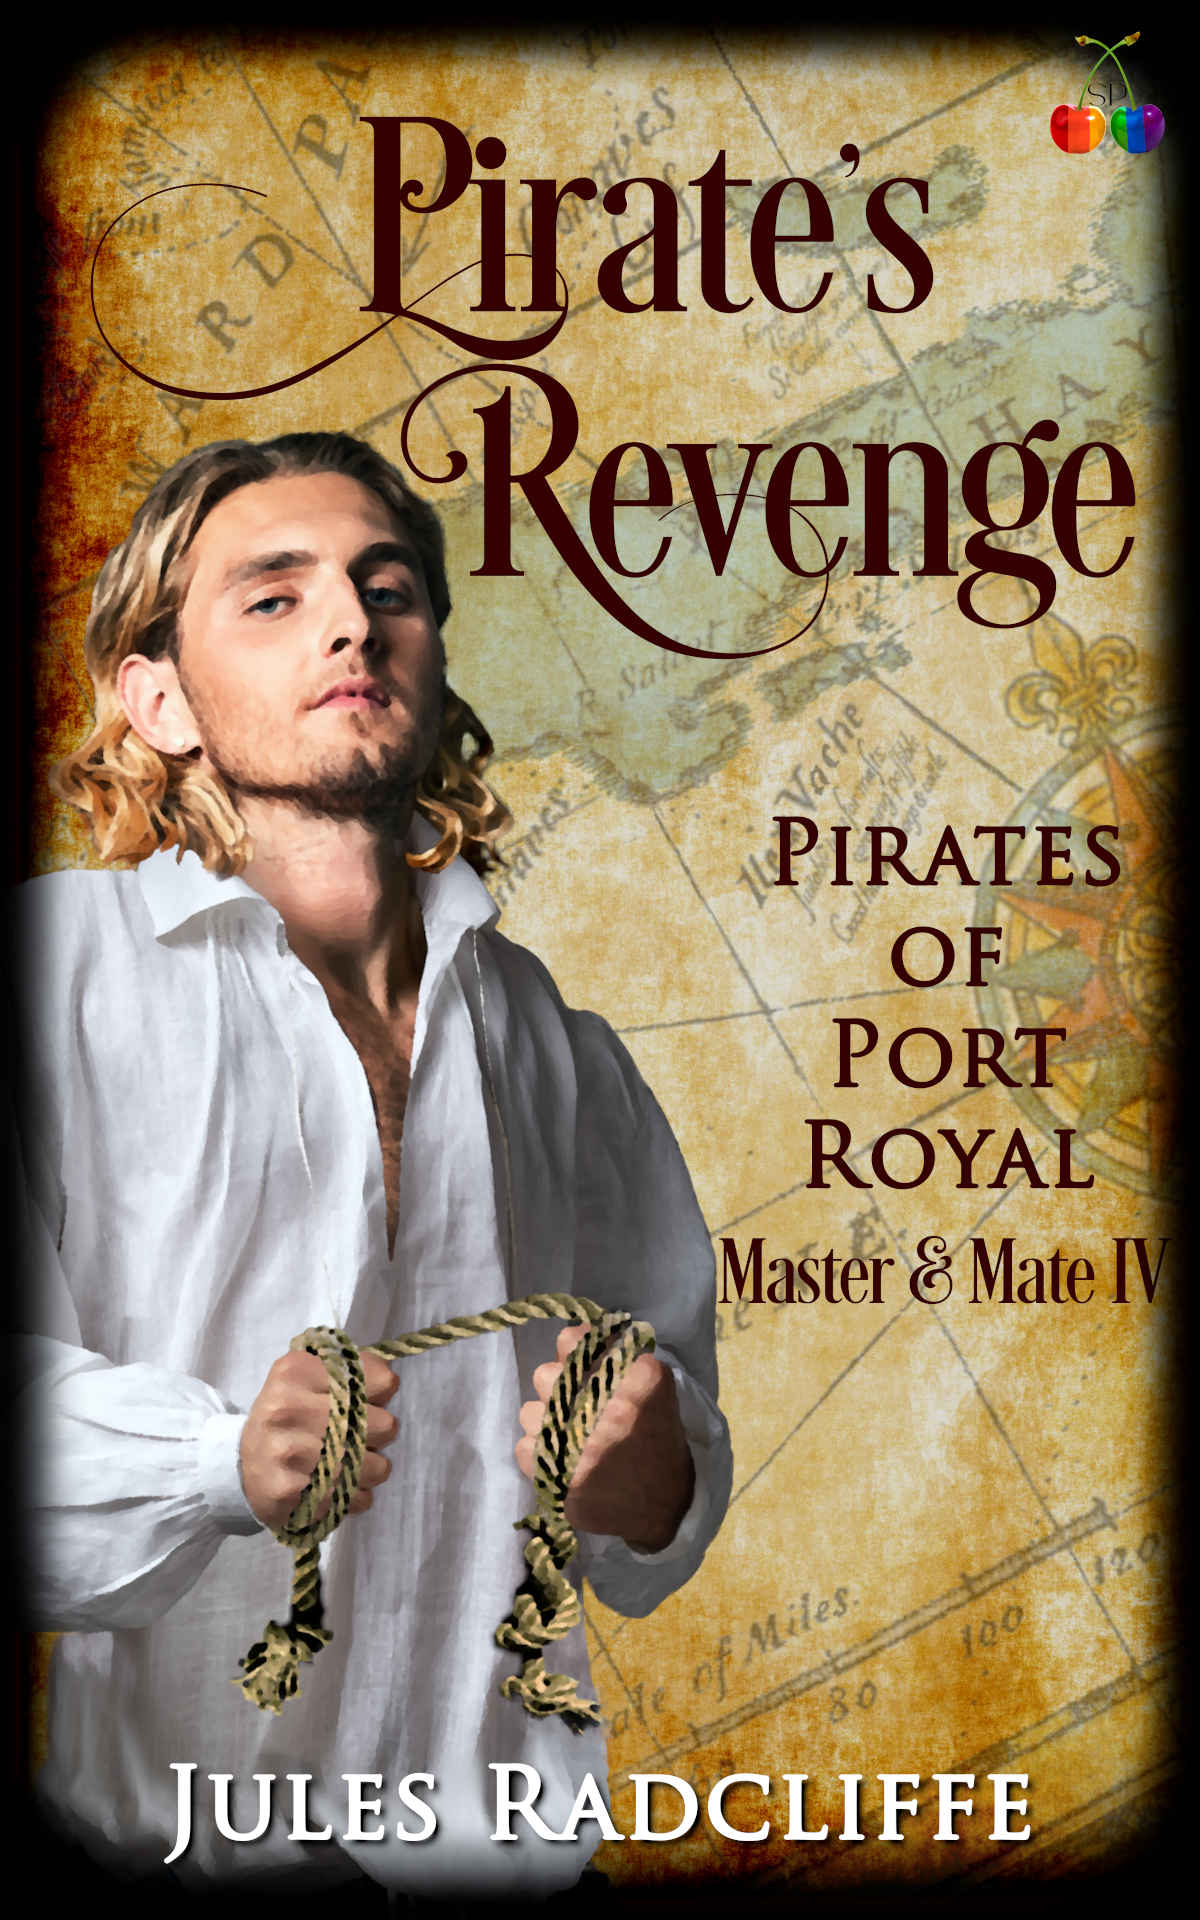 Cover of Pirates Revenge by Jules Radcliffe